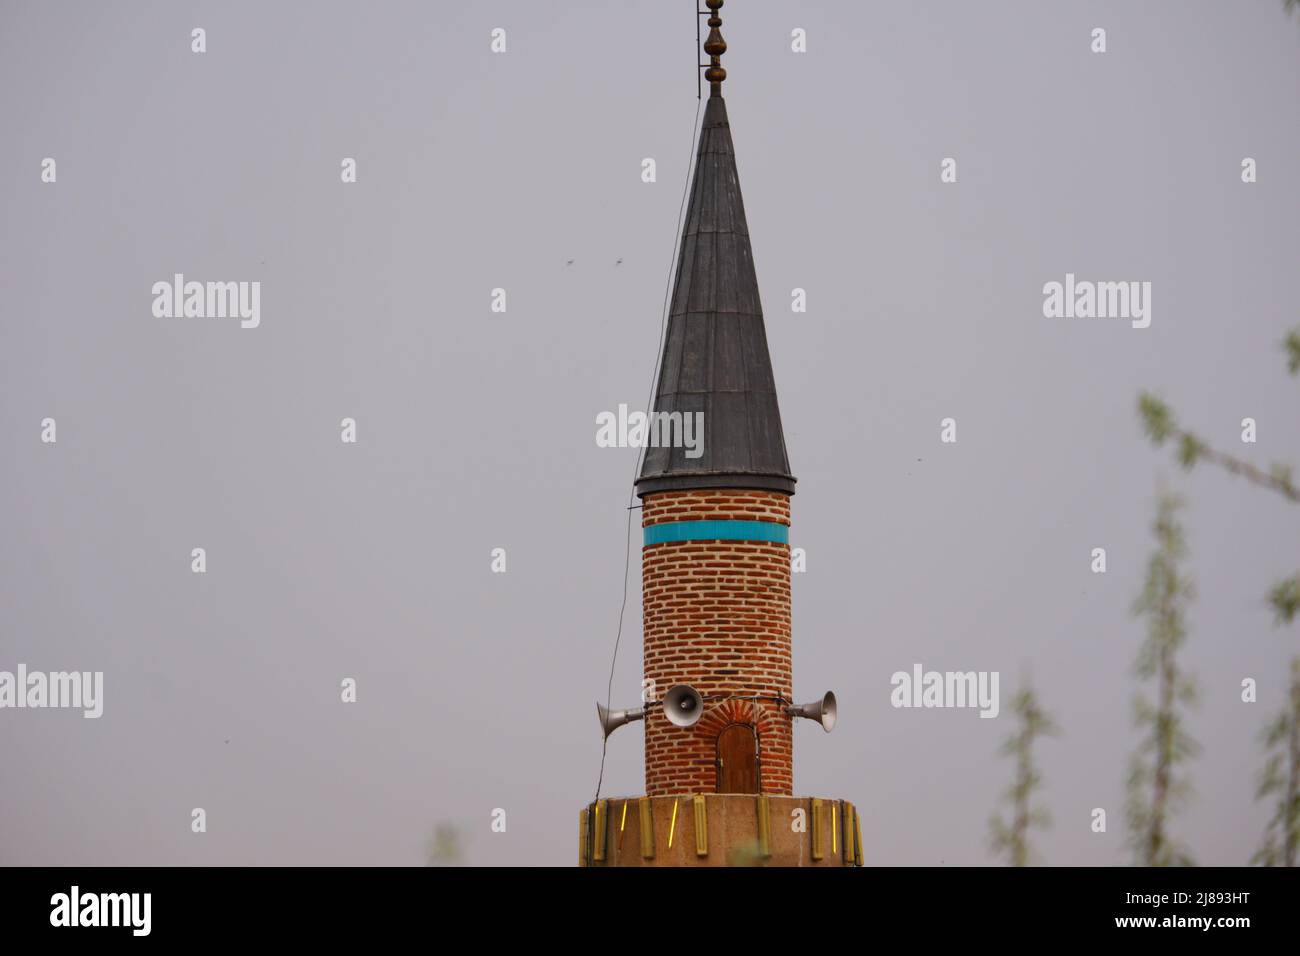 Historical Ottoman style stone minaret in a dark cloudy weather Stock Photo